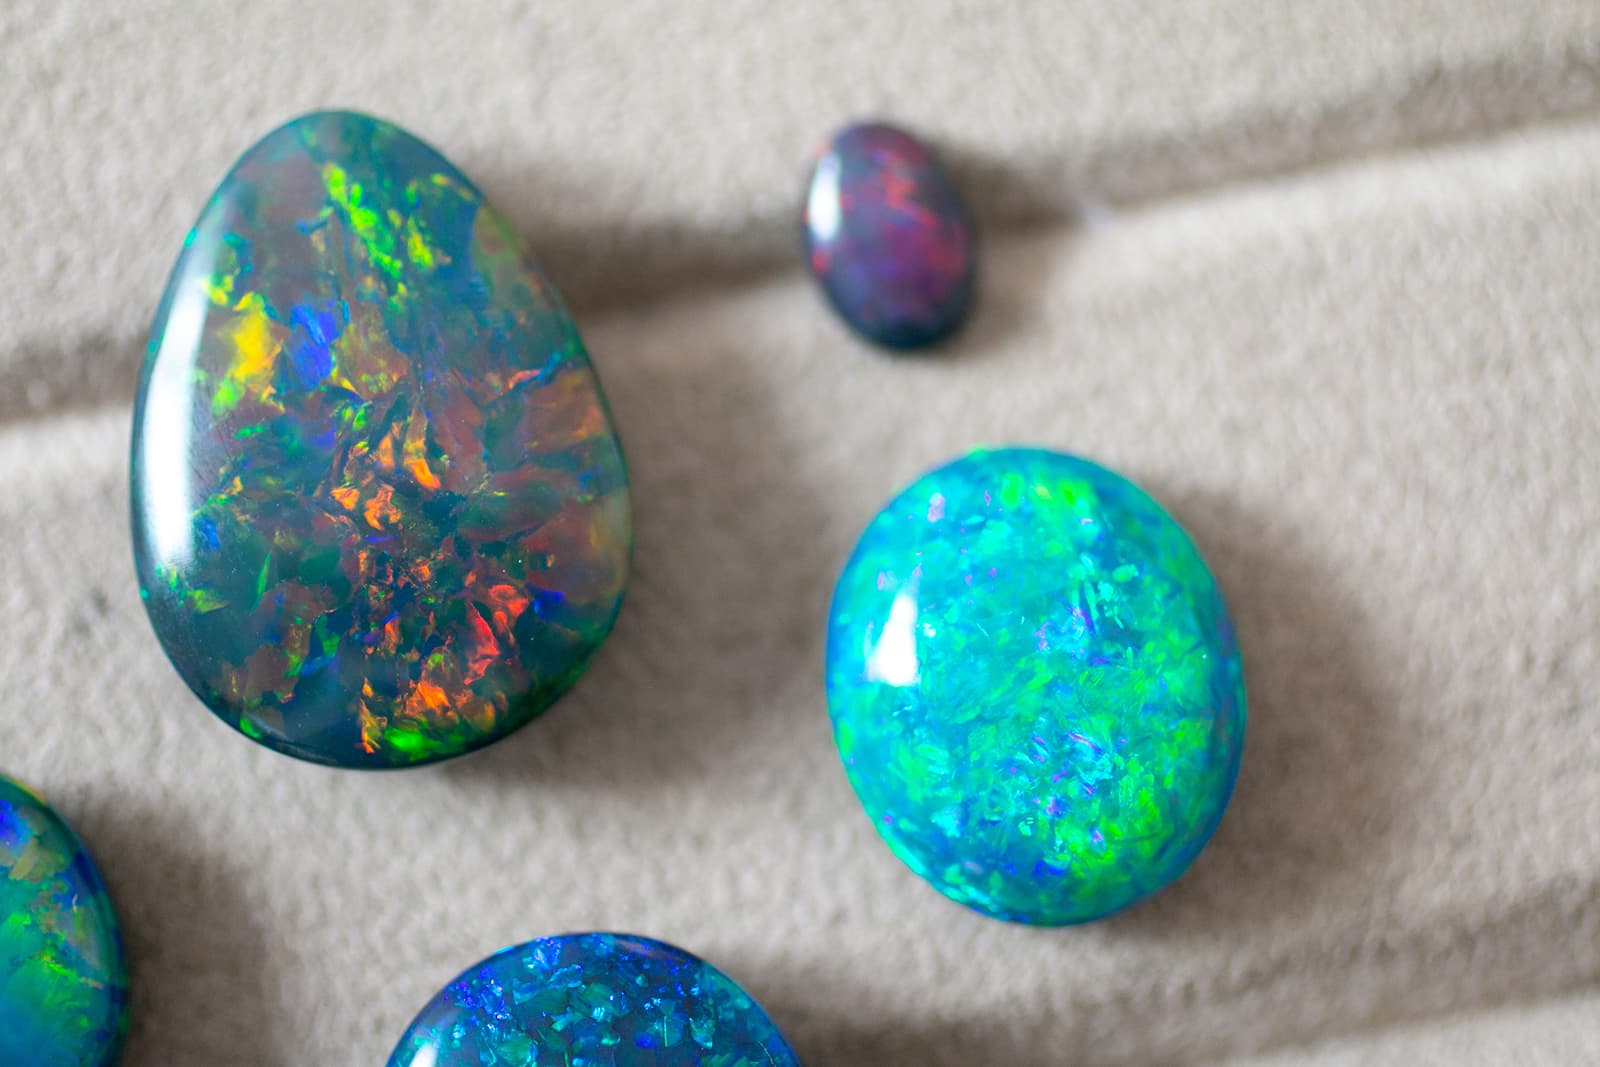 IMAGEM and its partner Chris Price Opals specialise in black opals from New South Wales, Australia